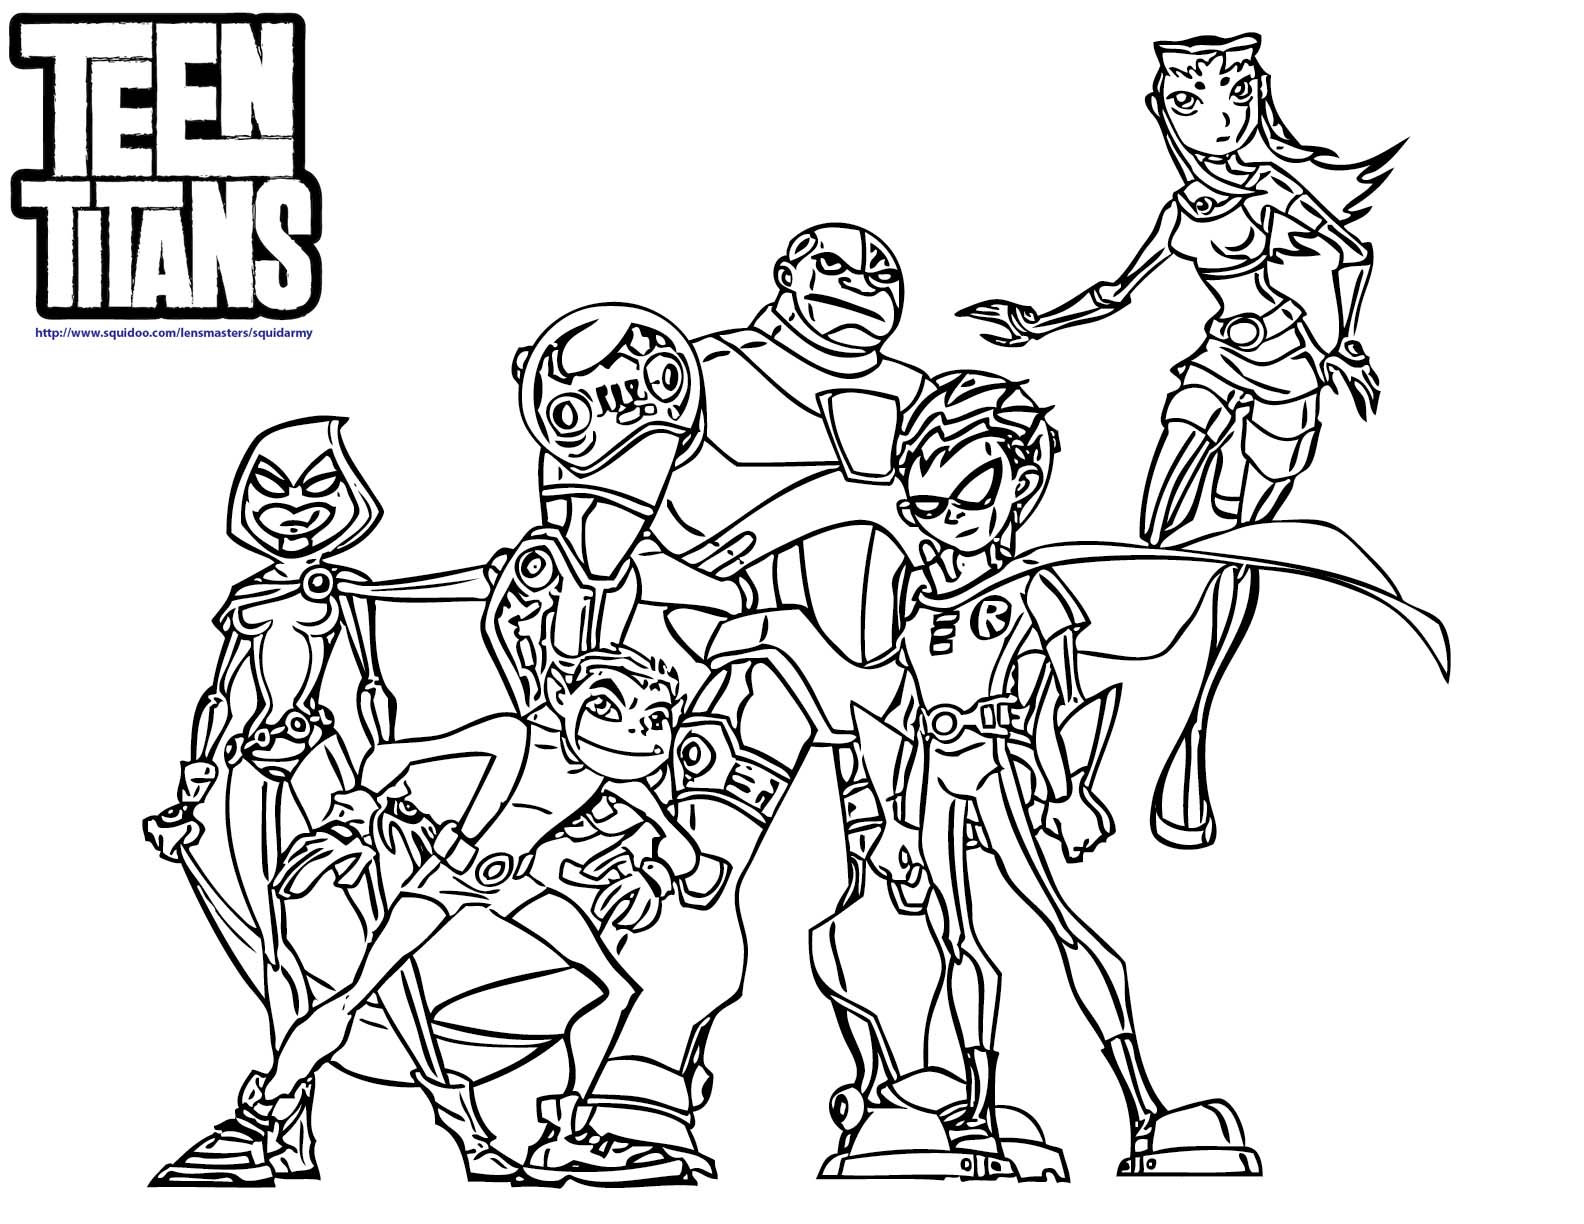 Teen Titans Coloring Page - Coloring Pages for Kids and for Adults